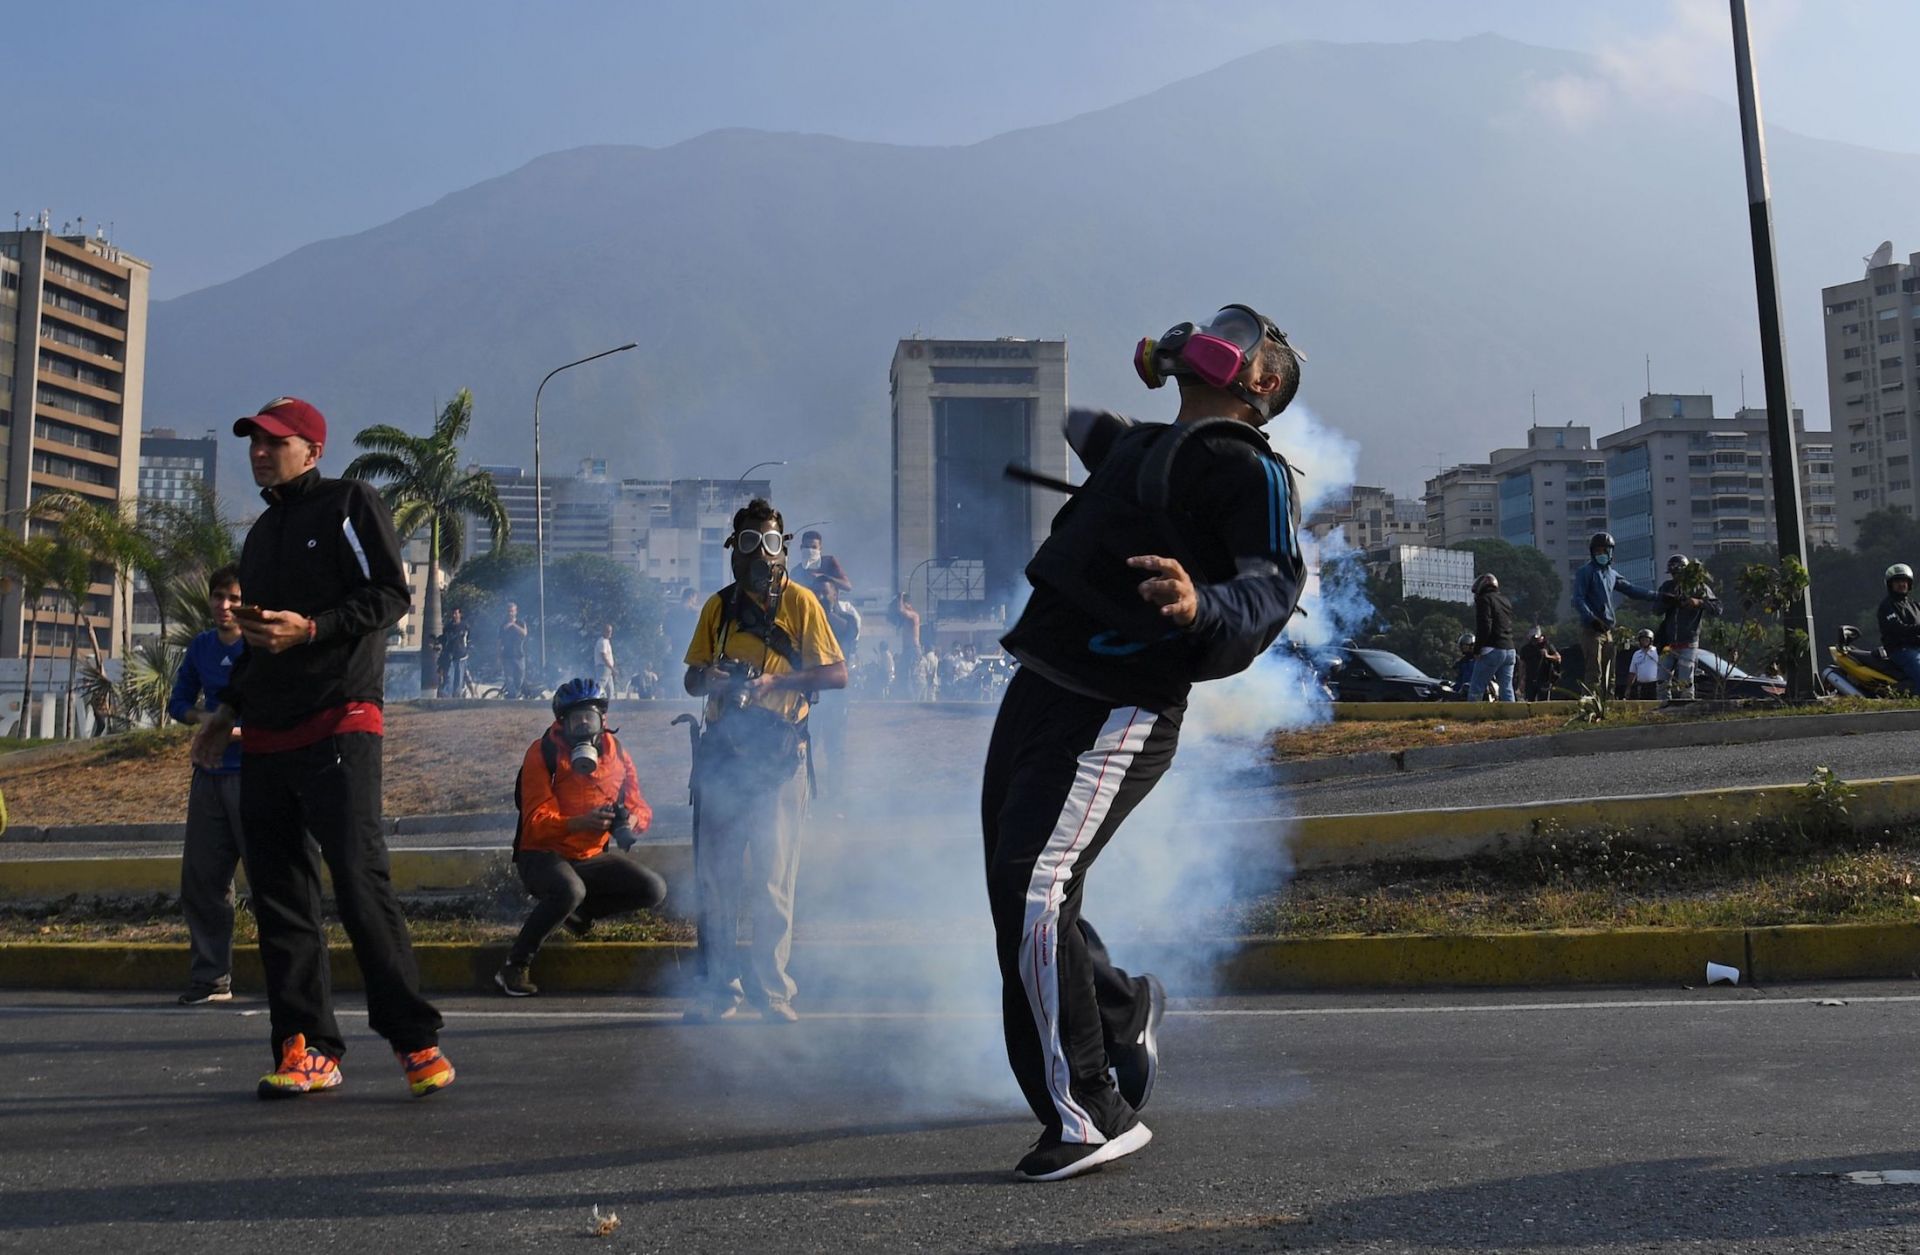 Opposition supporters clash with Venezuelan security forces in Caracas on April 30, 2019.